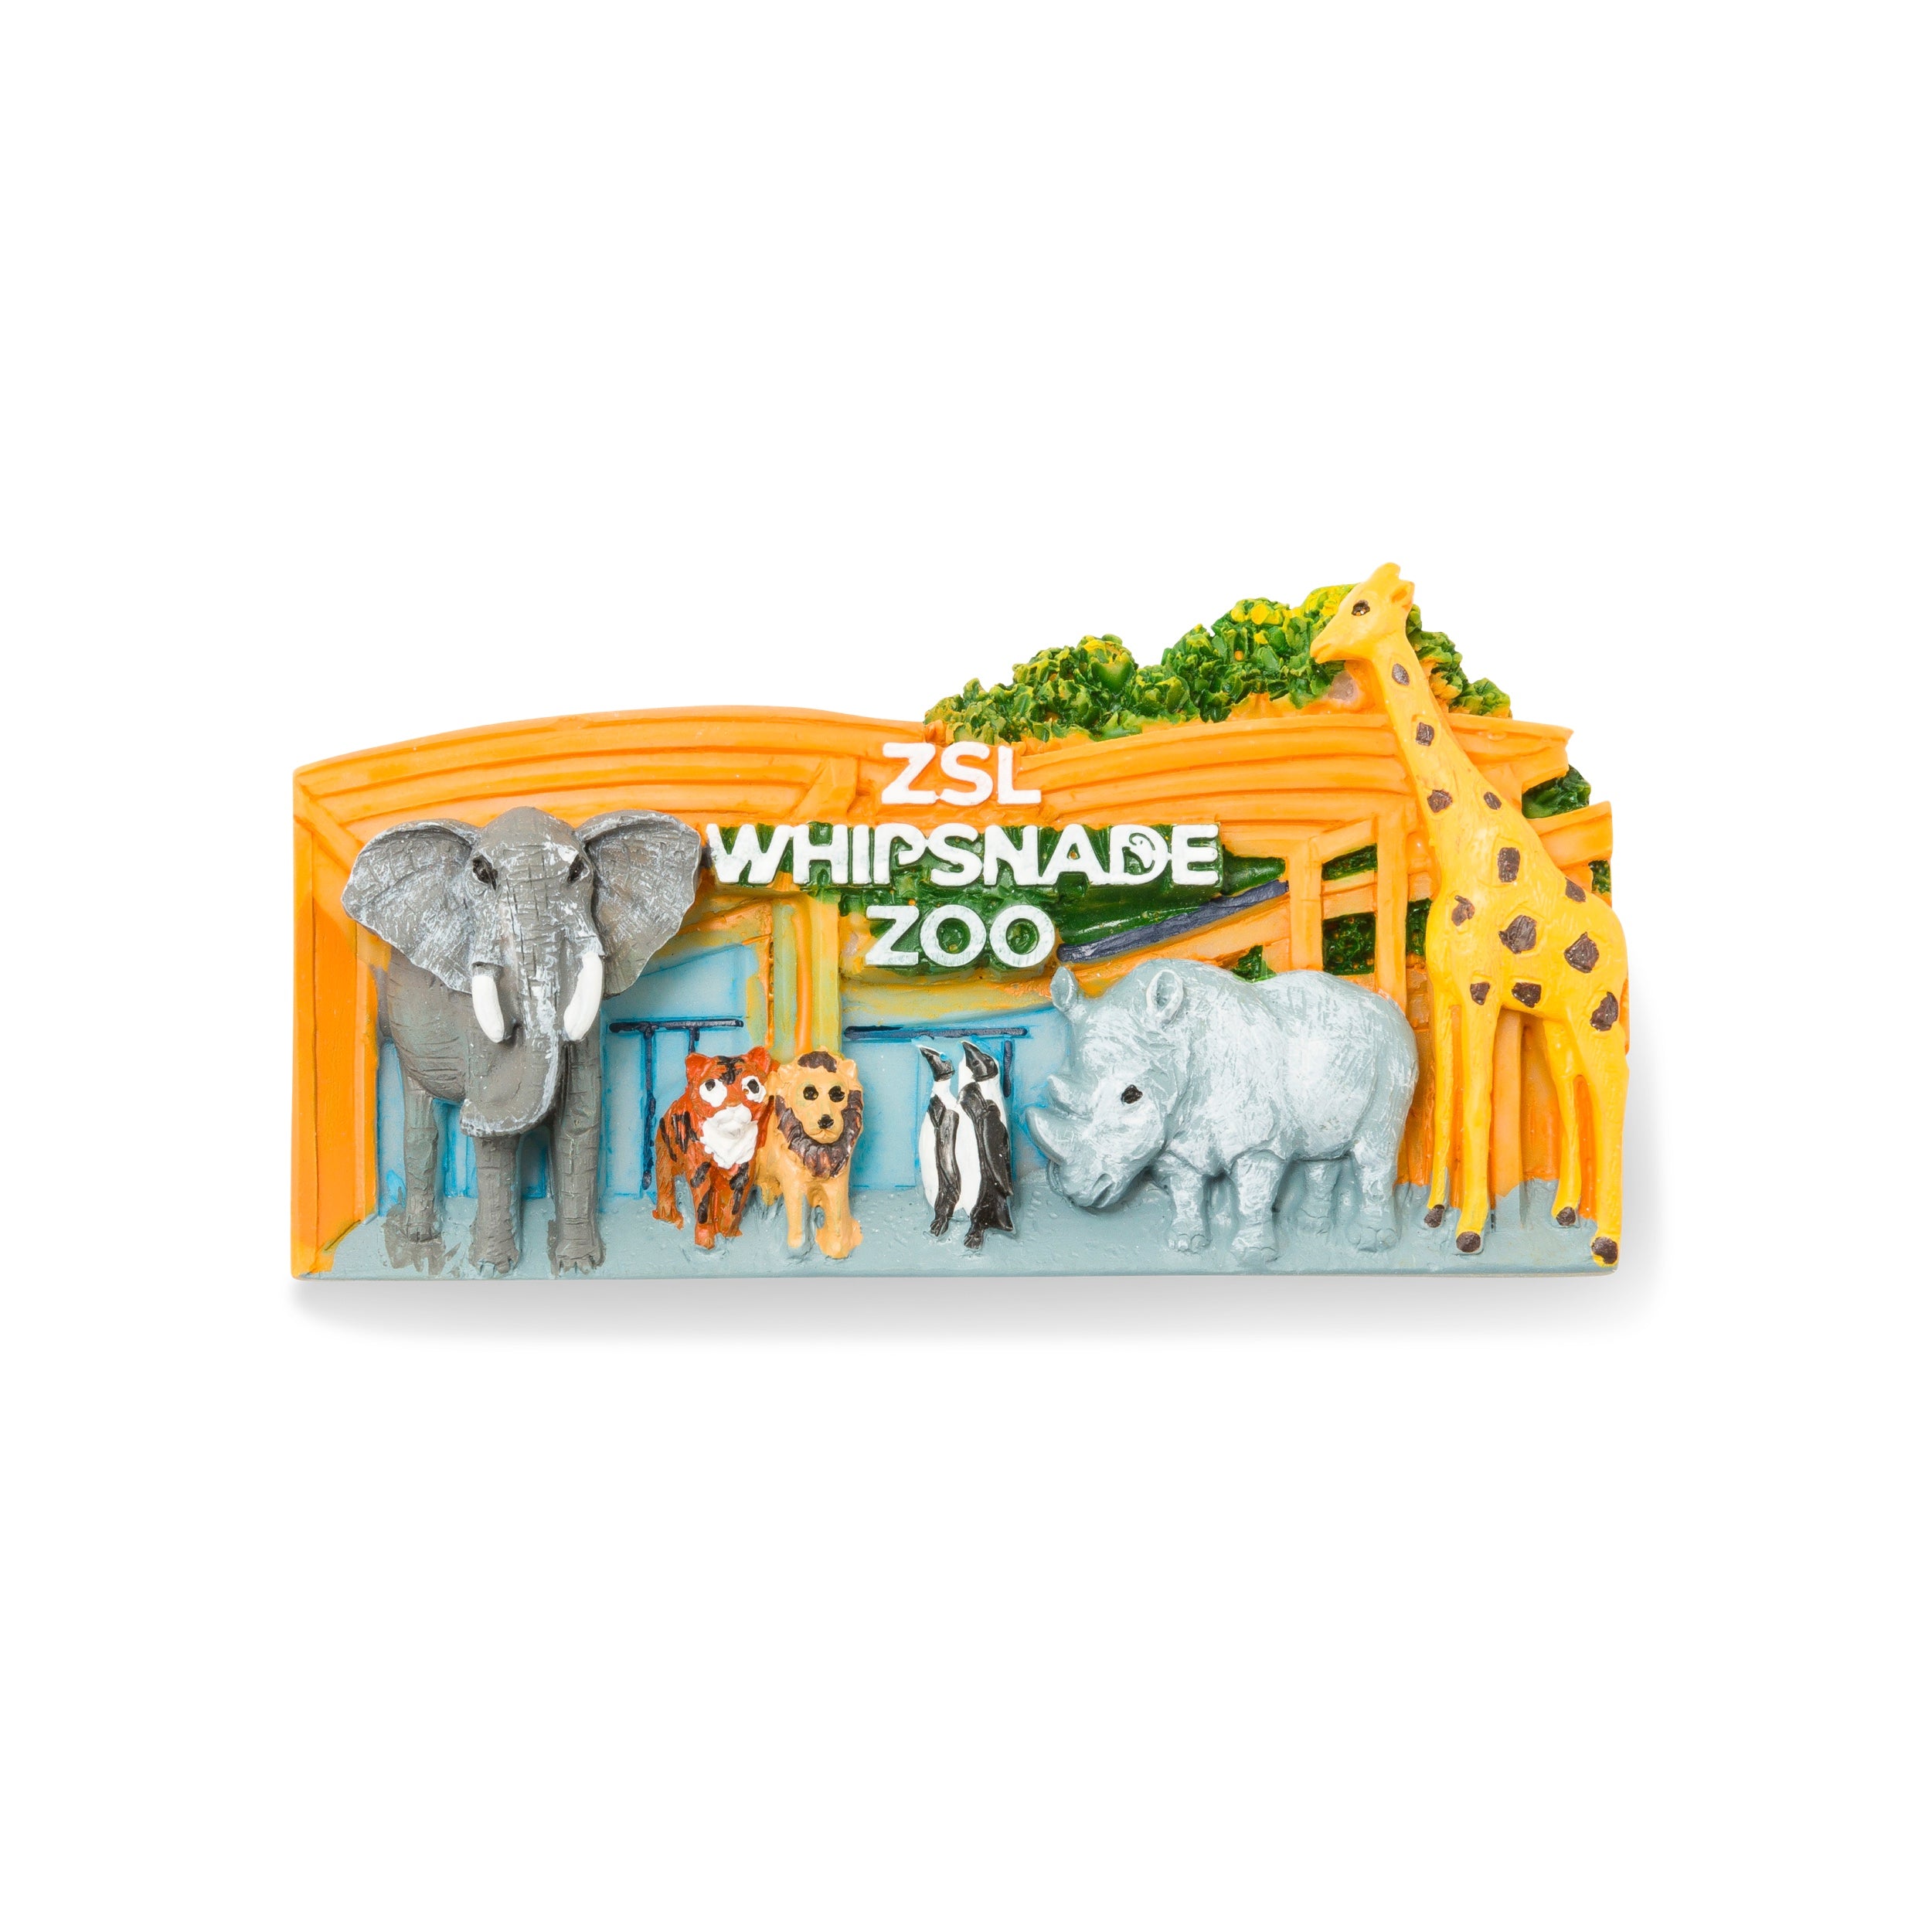 ZSL Whipsnade Zoo Gates Magnet